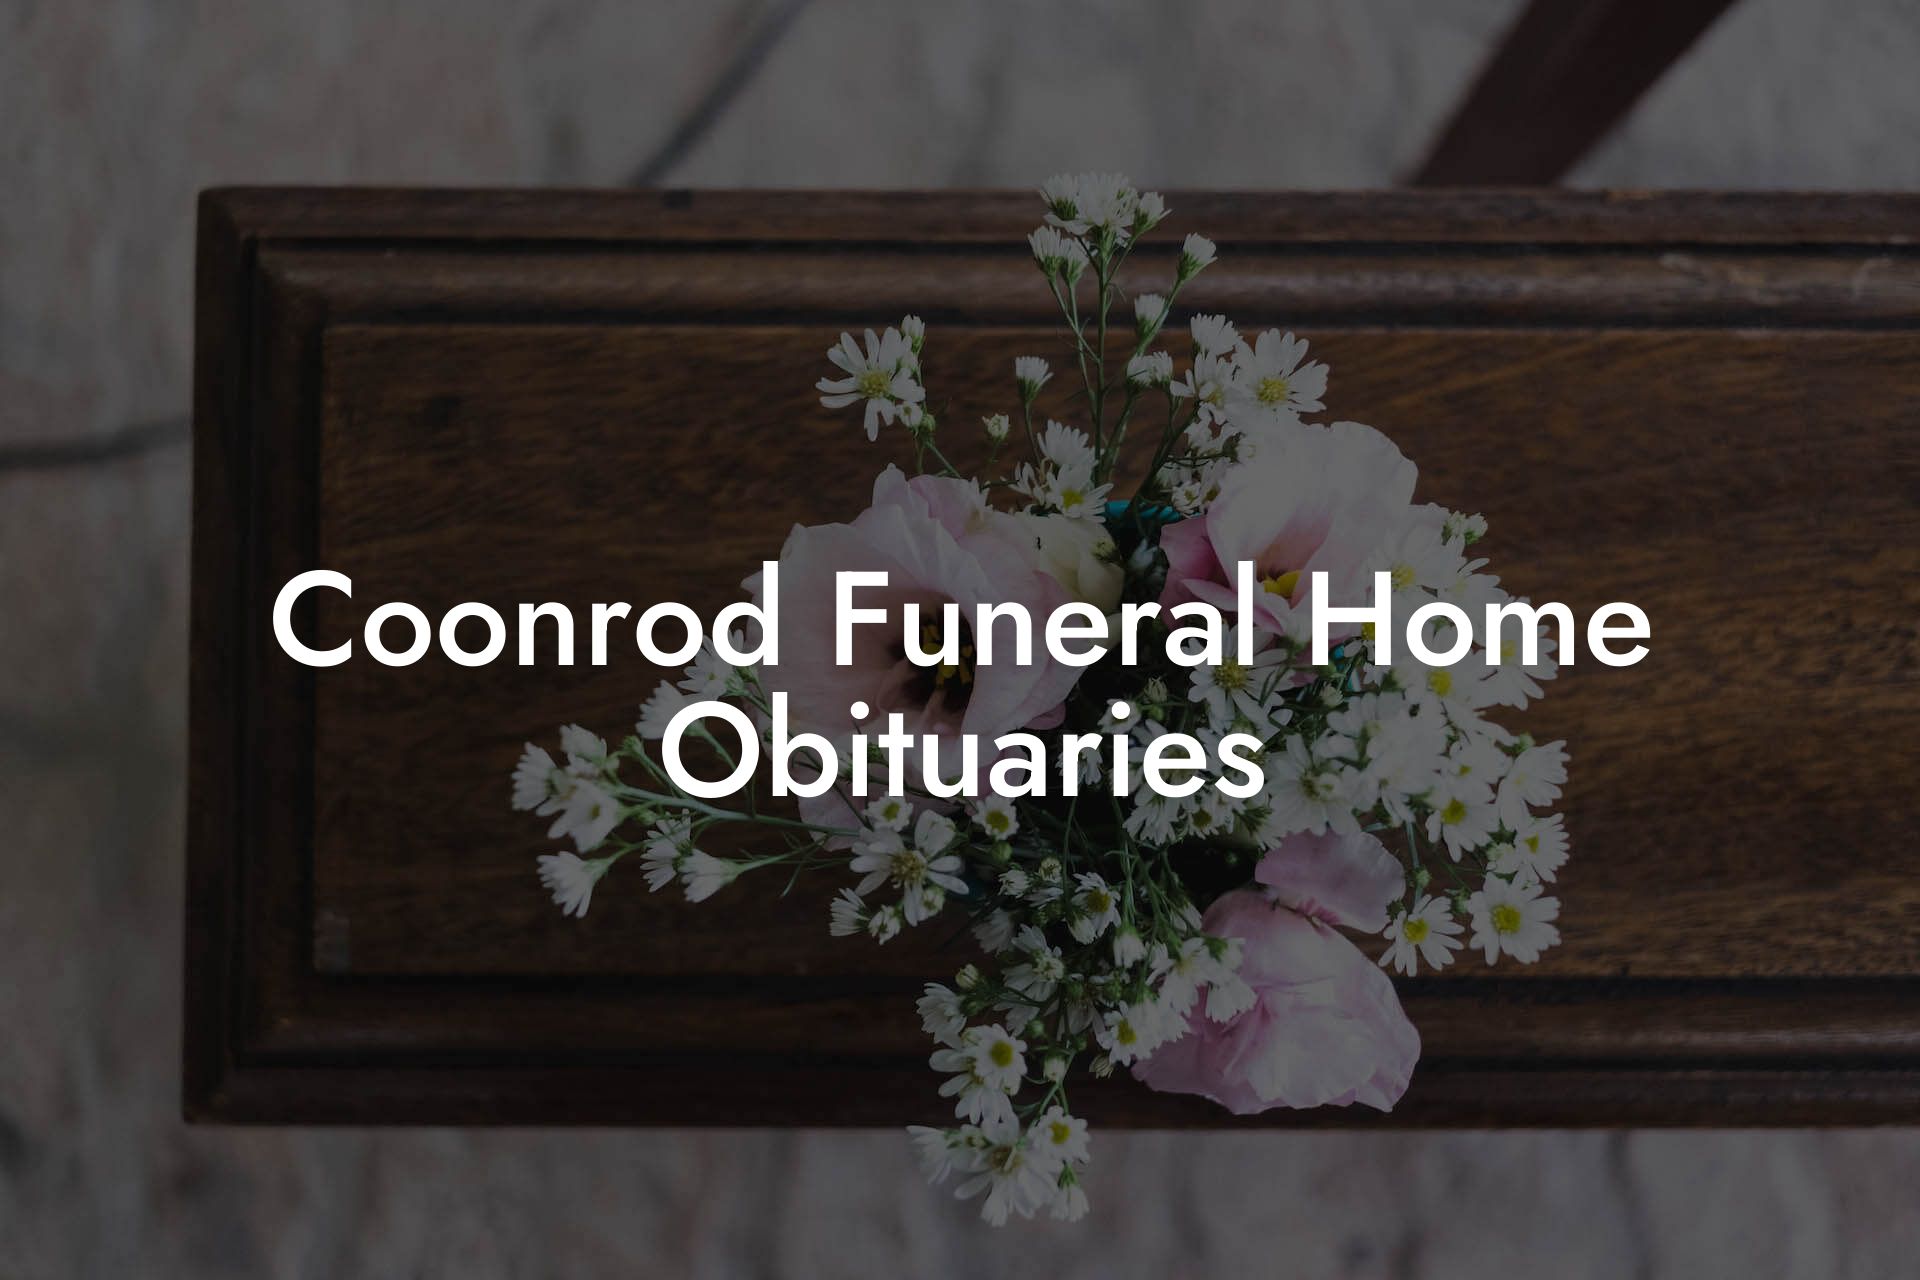 Coonrod Funeral Home Obituaries